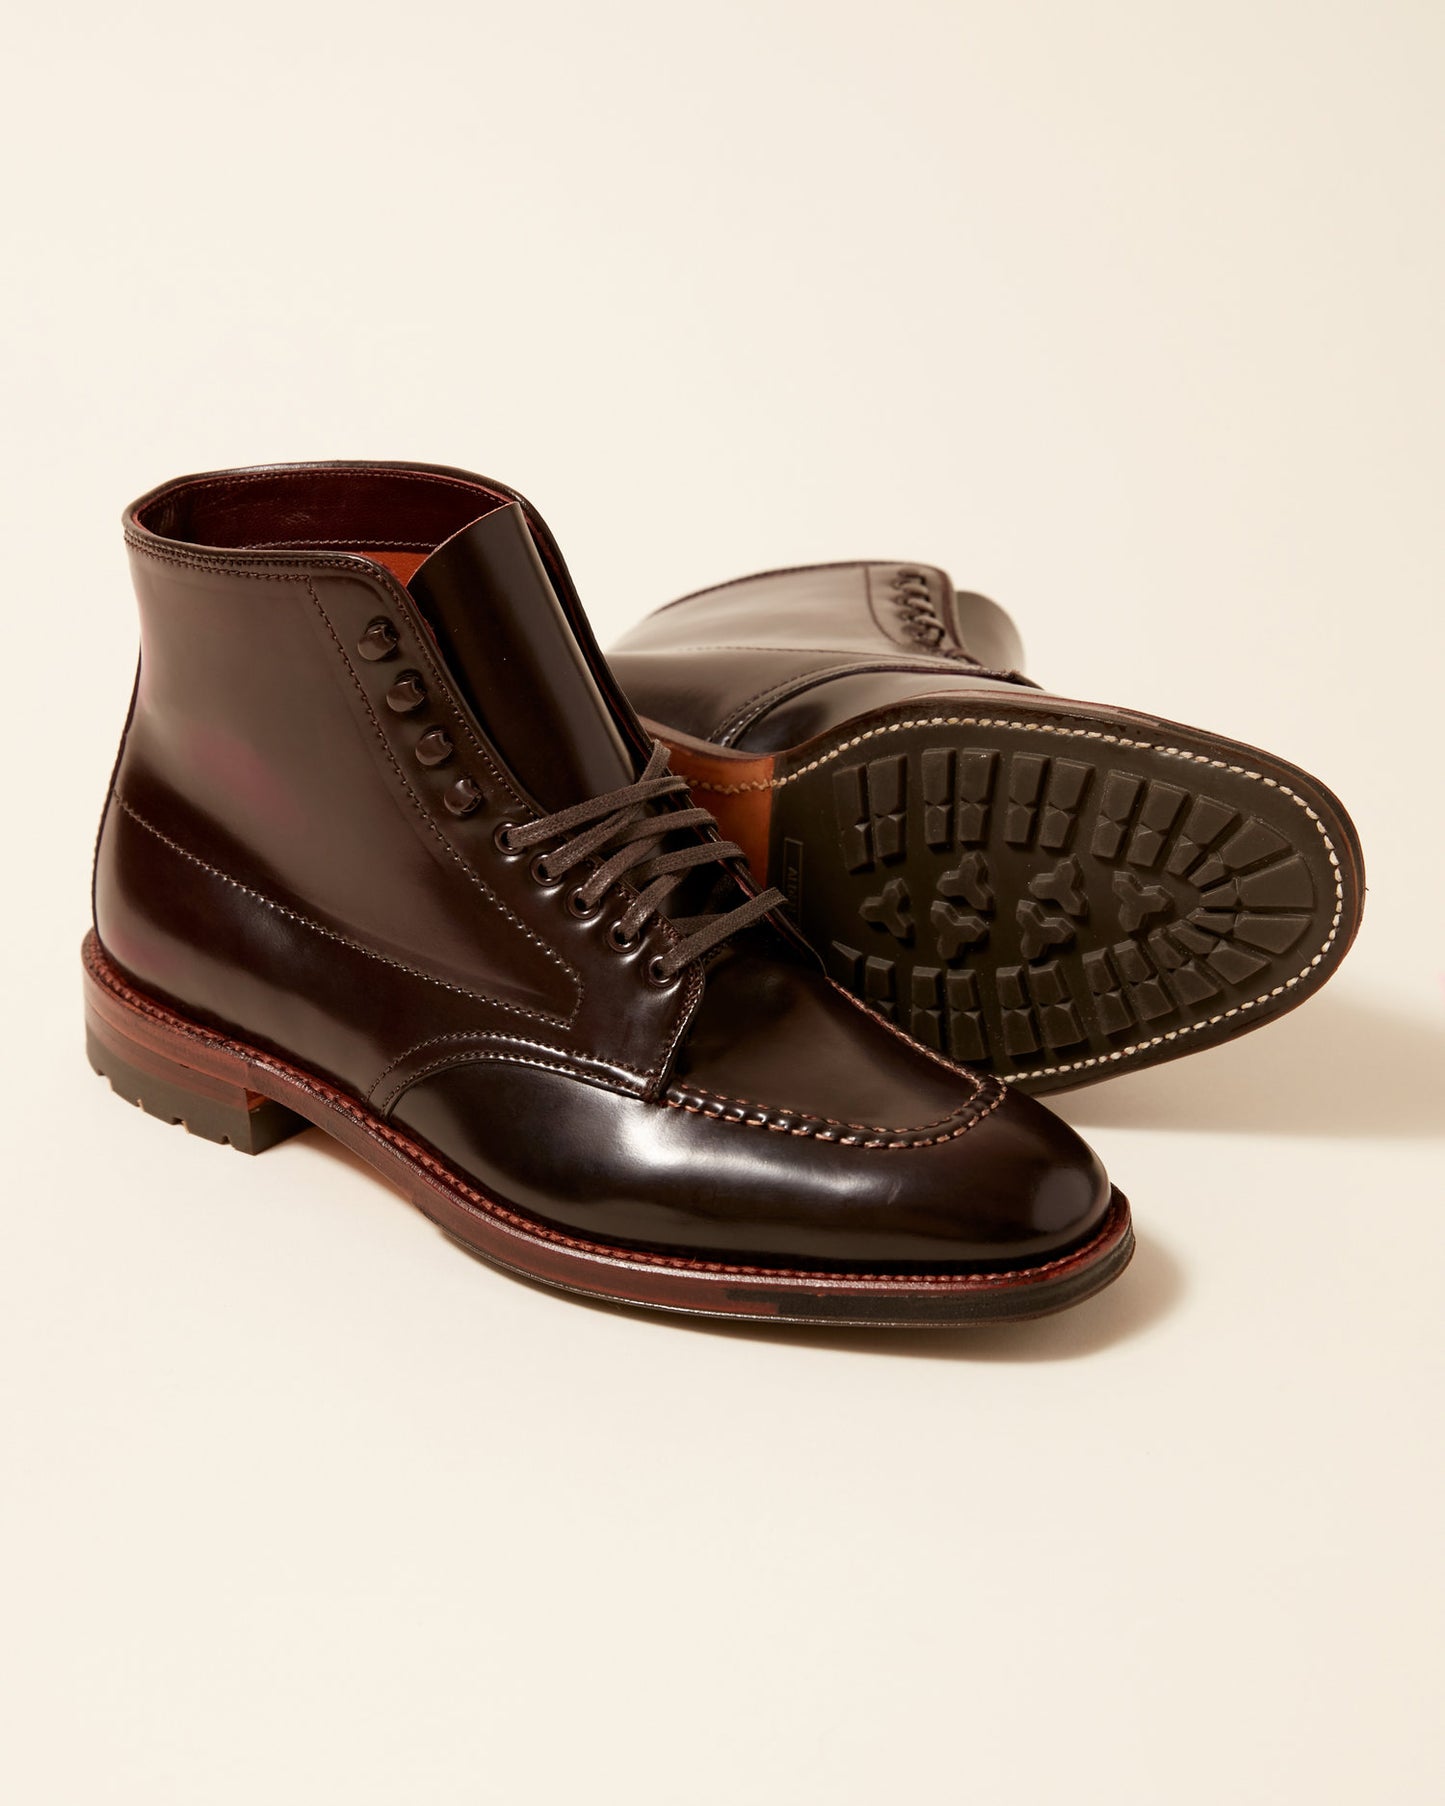 "Post Alley" Color 8 Shell Cordovan Plaza Last Handsewn Indy Boot